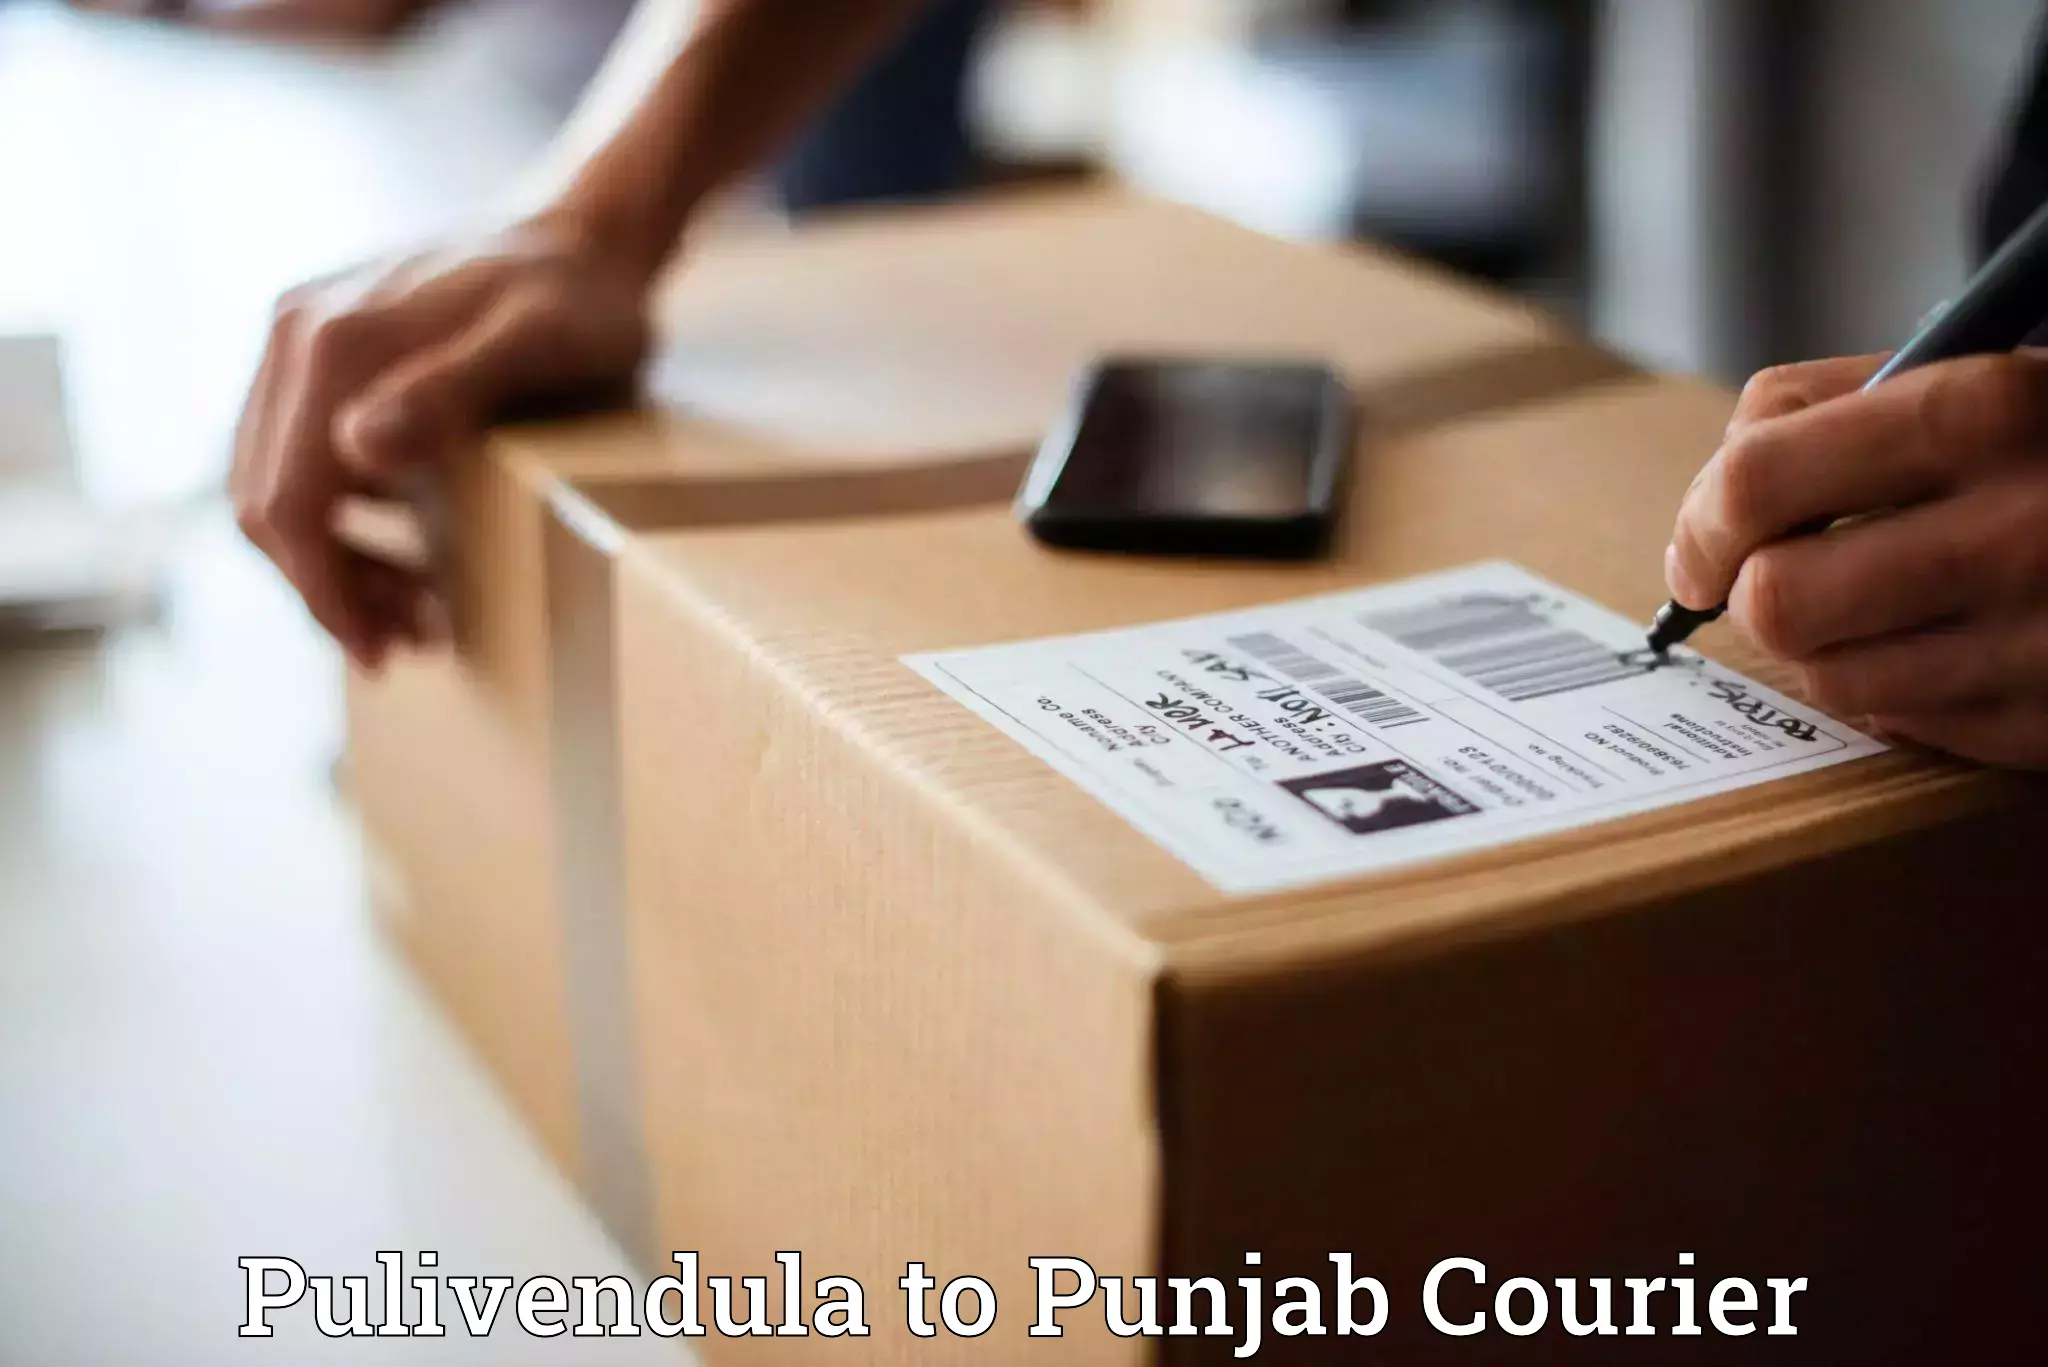 Same day shipping Pulivendula to Sultanpur Lodhi